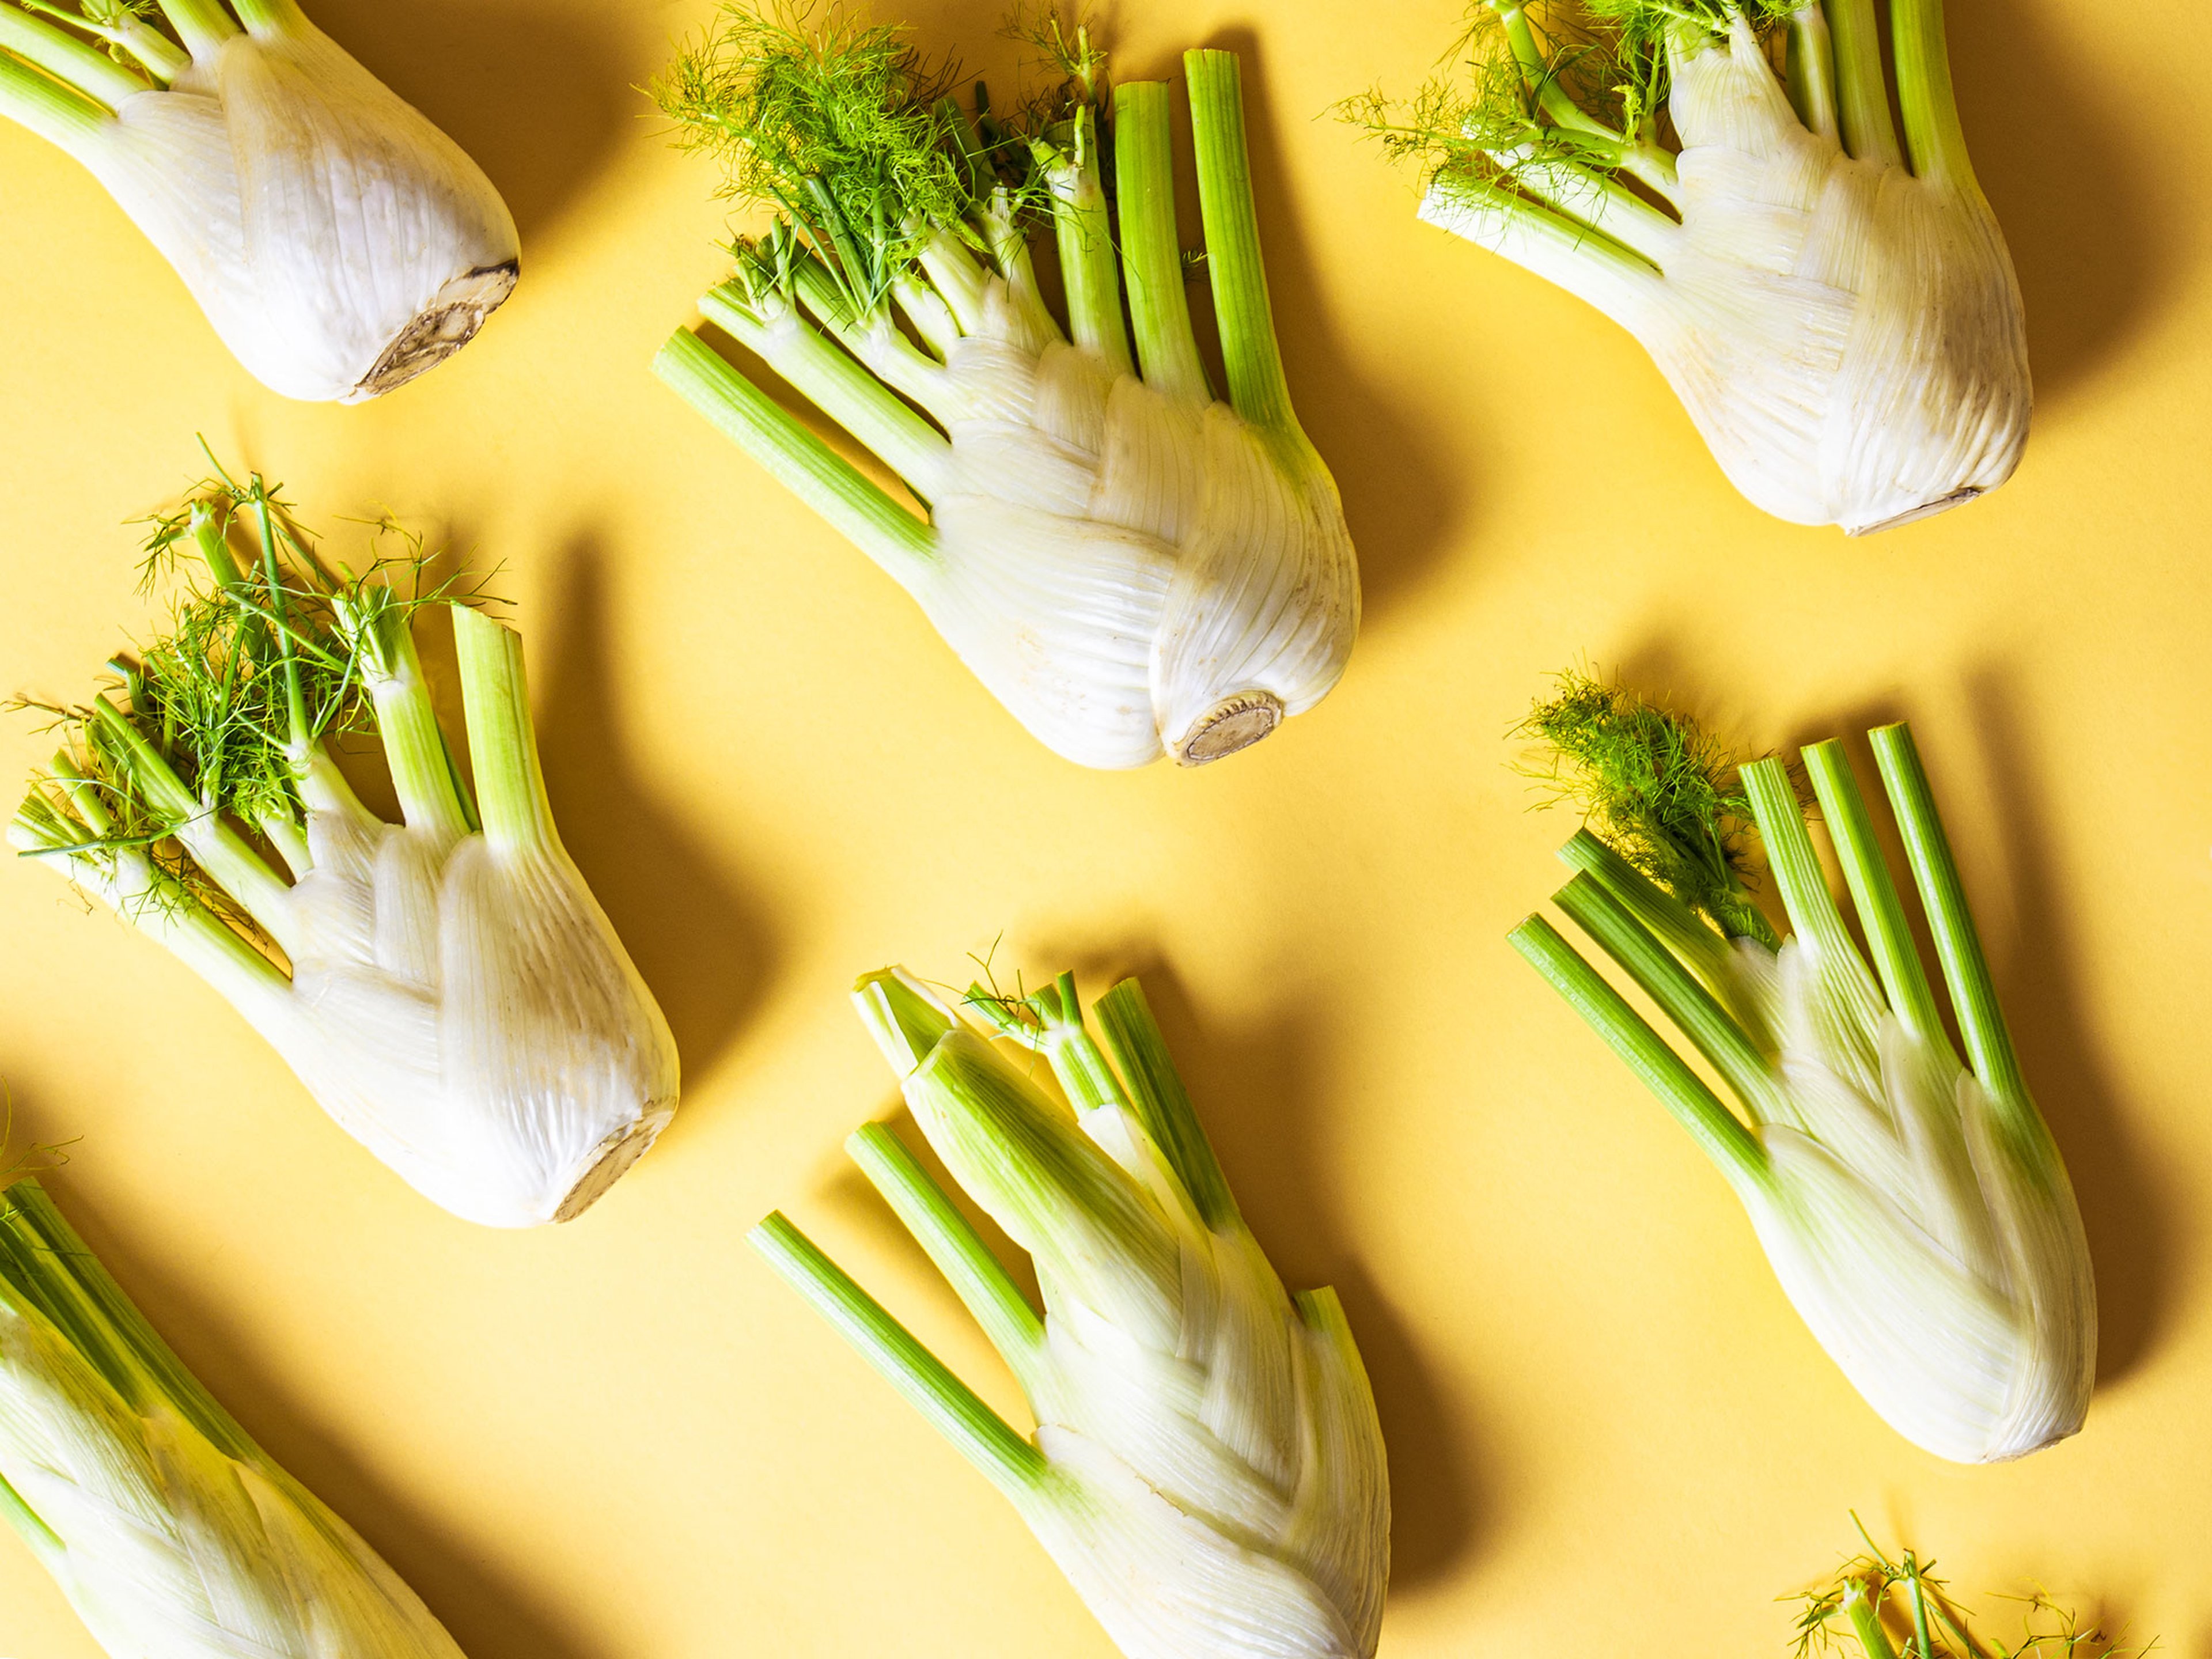 Everything You Need to Know About Preparing and Storing In Season Fennel